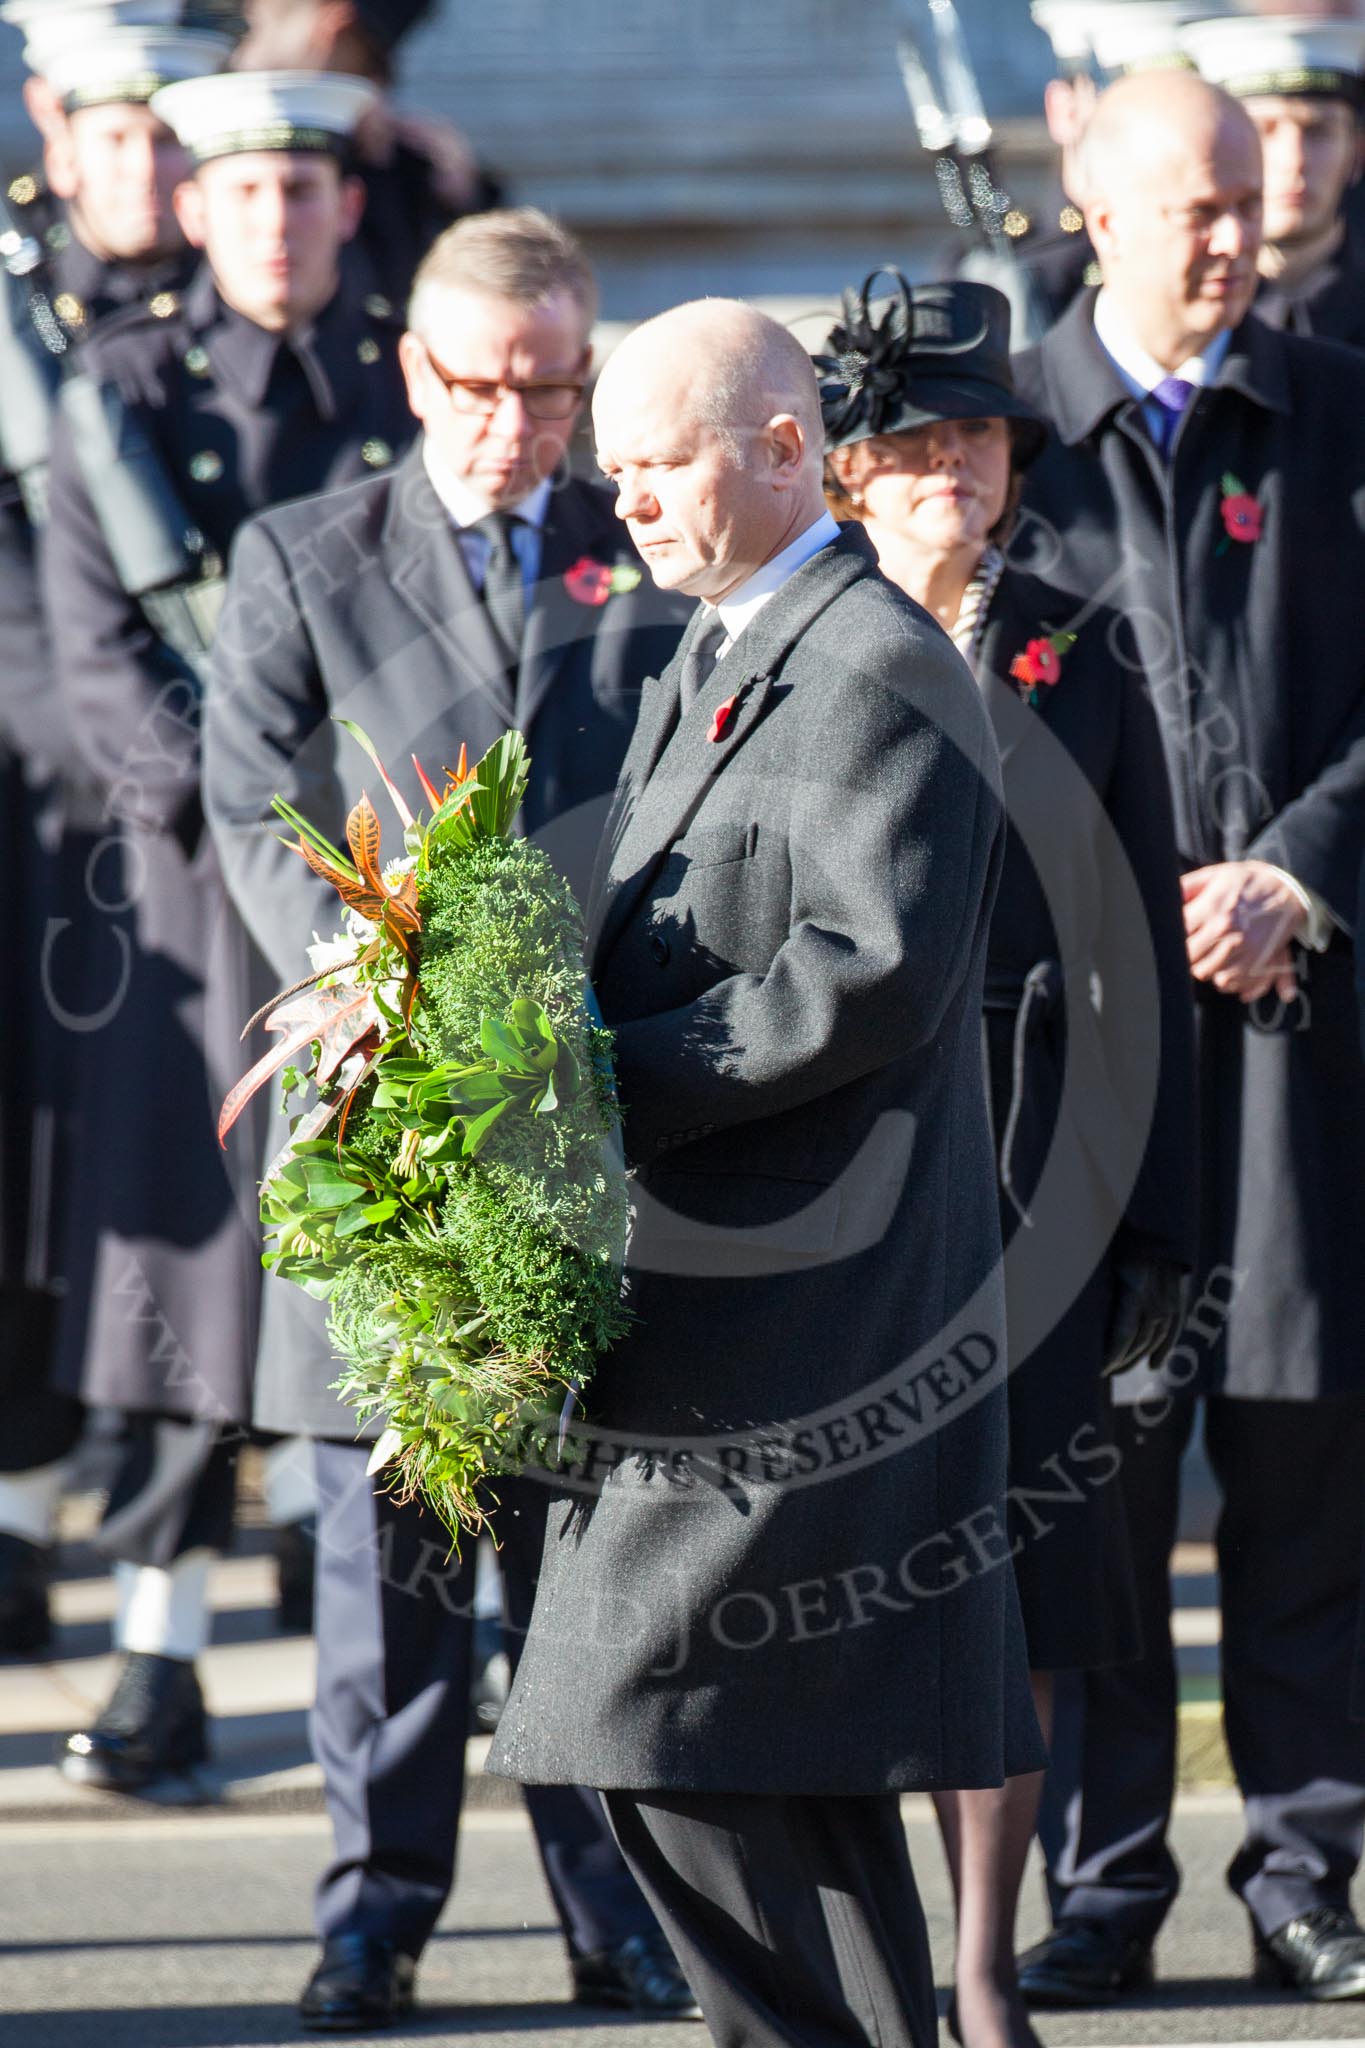 The Foreign Secretary, William Hague, about to lay a wreath at the Cenotaph.